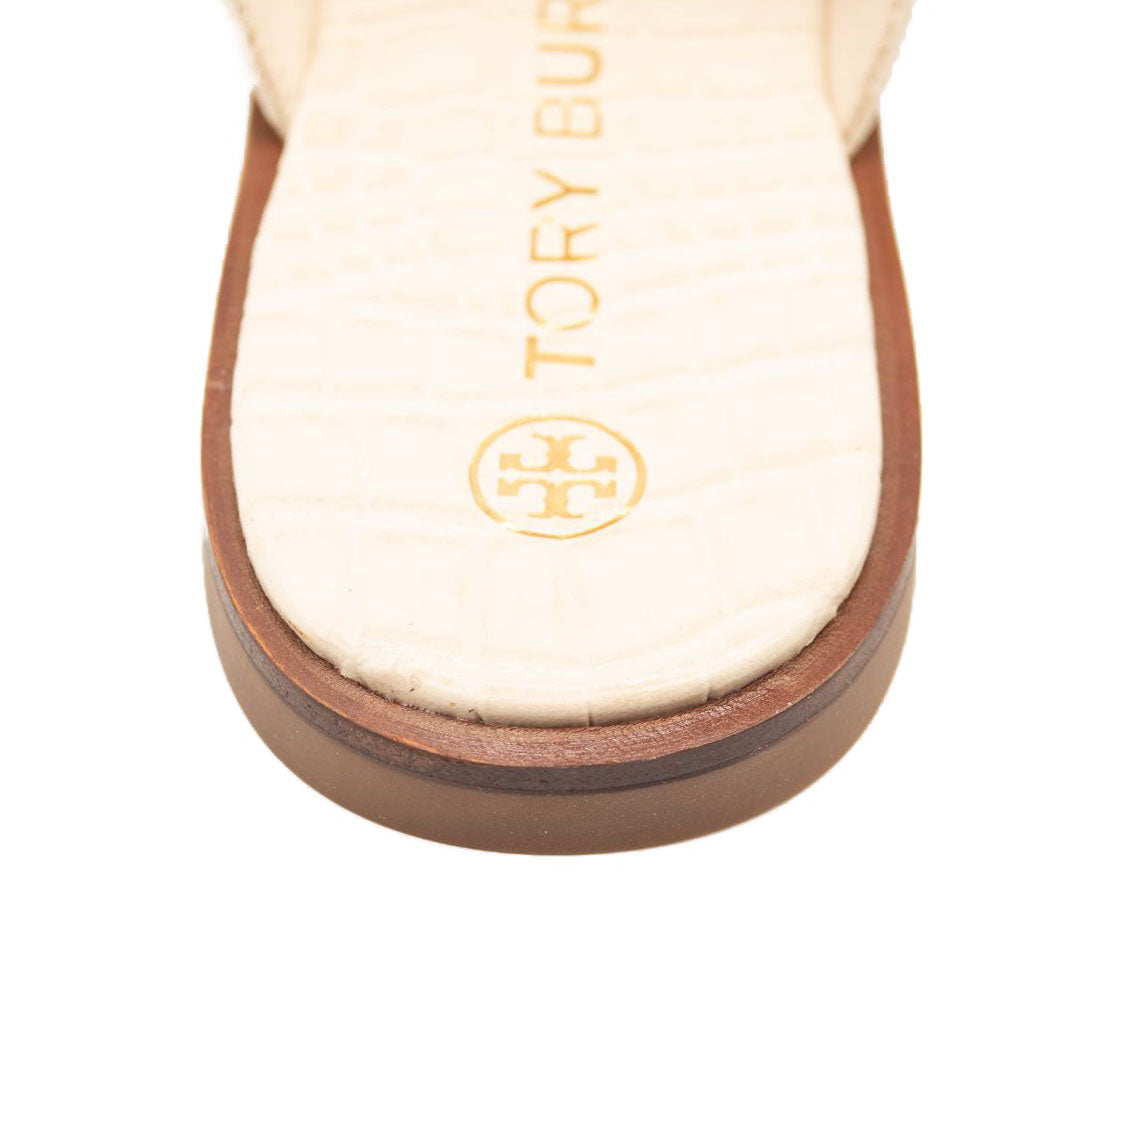 NEW $248 TORY BURCH OFF WHITE NEW CARSON THONG WELT CROC SANDALS US 9